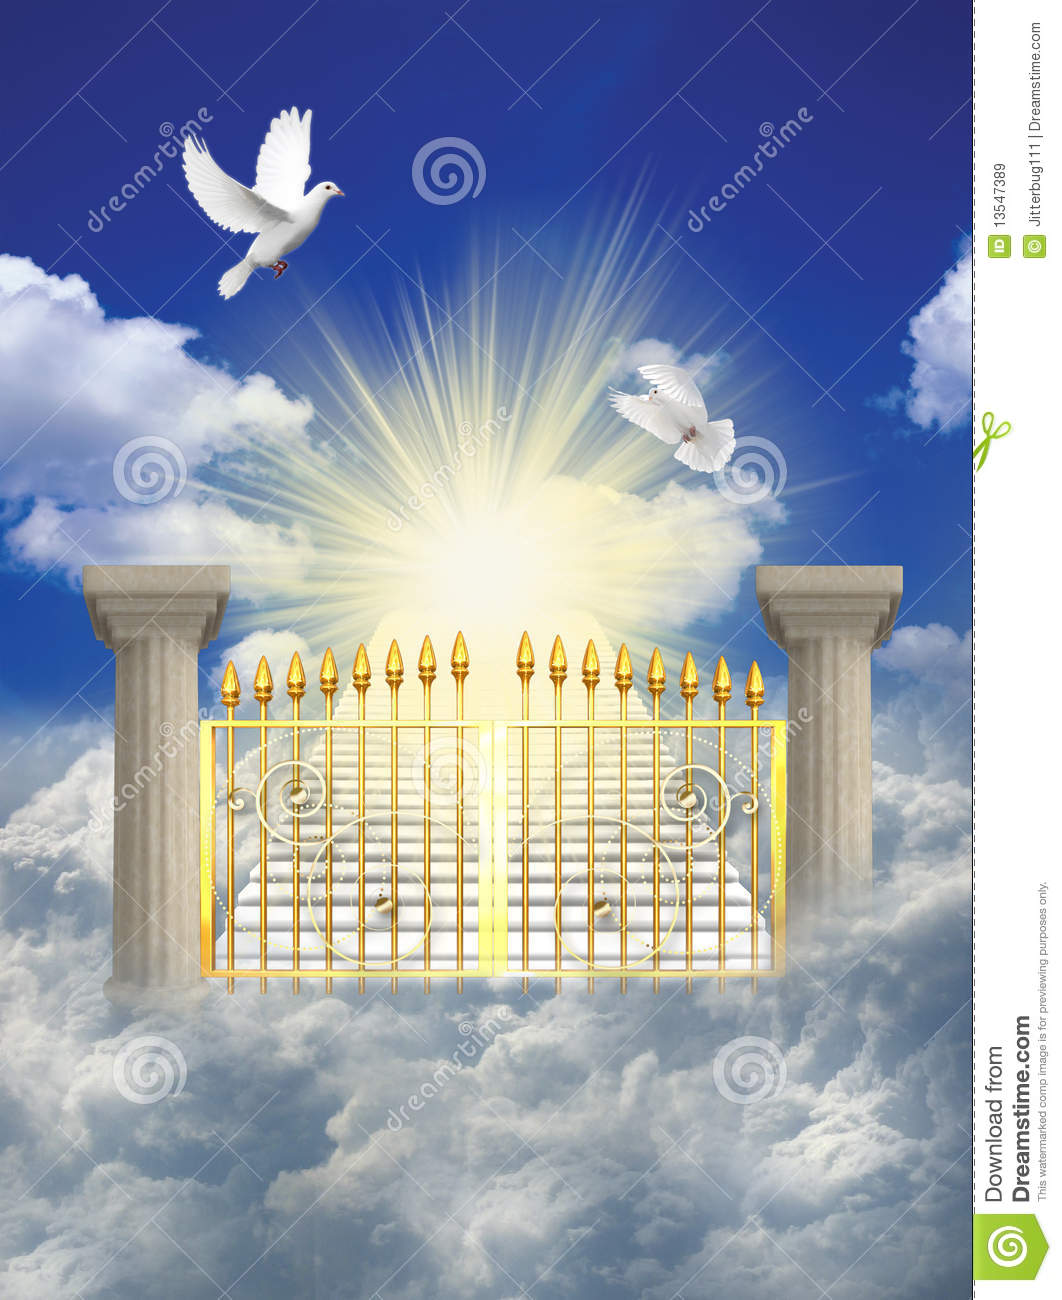 Heaven Royalty Free Stock Images   Image  13547389